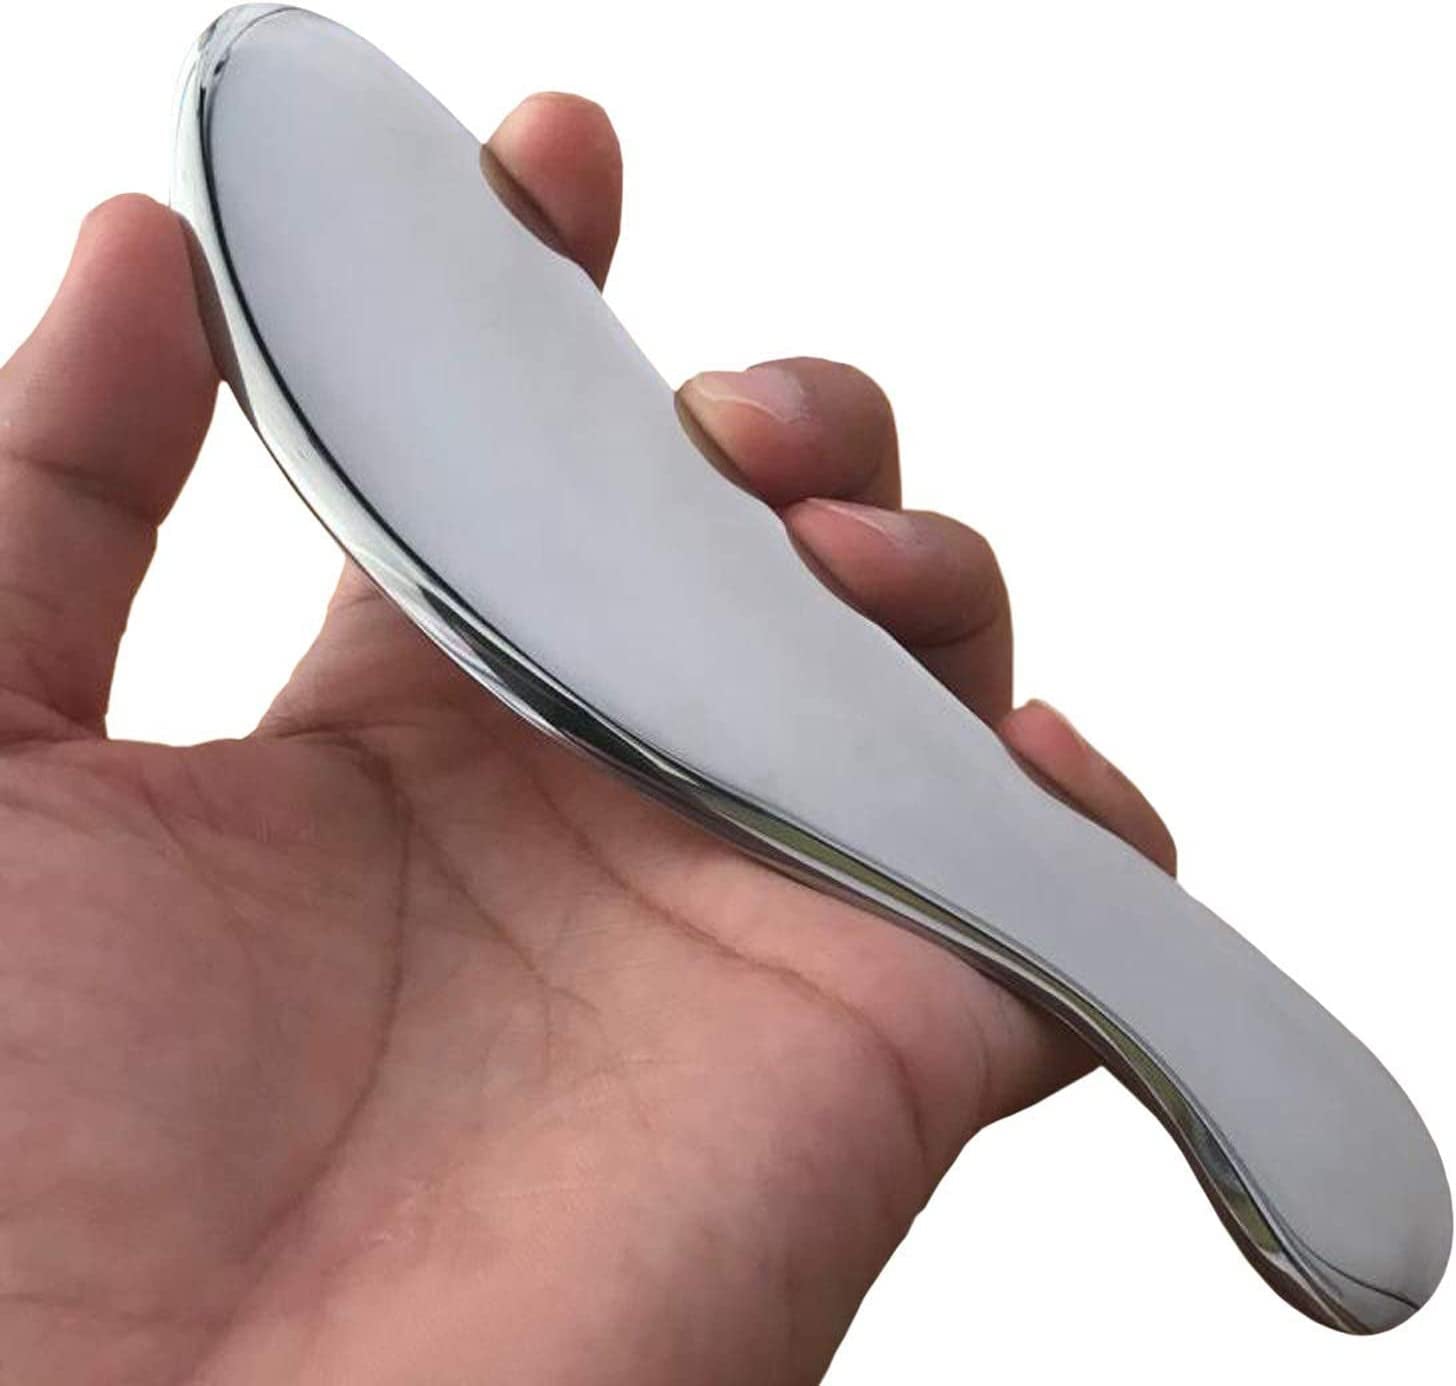 Stainless Steel Gua Sha Massage Tool - Soft Tissue Therapy Pain Relief